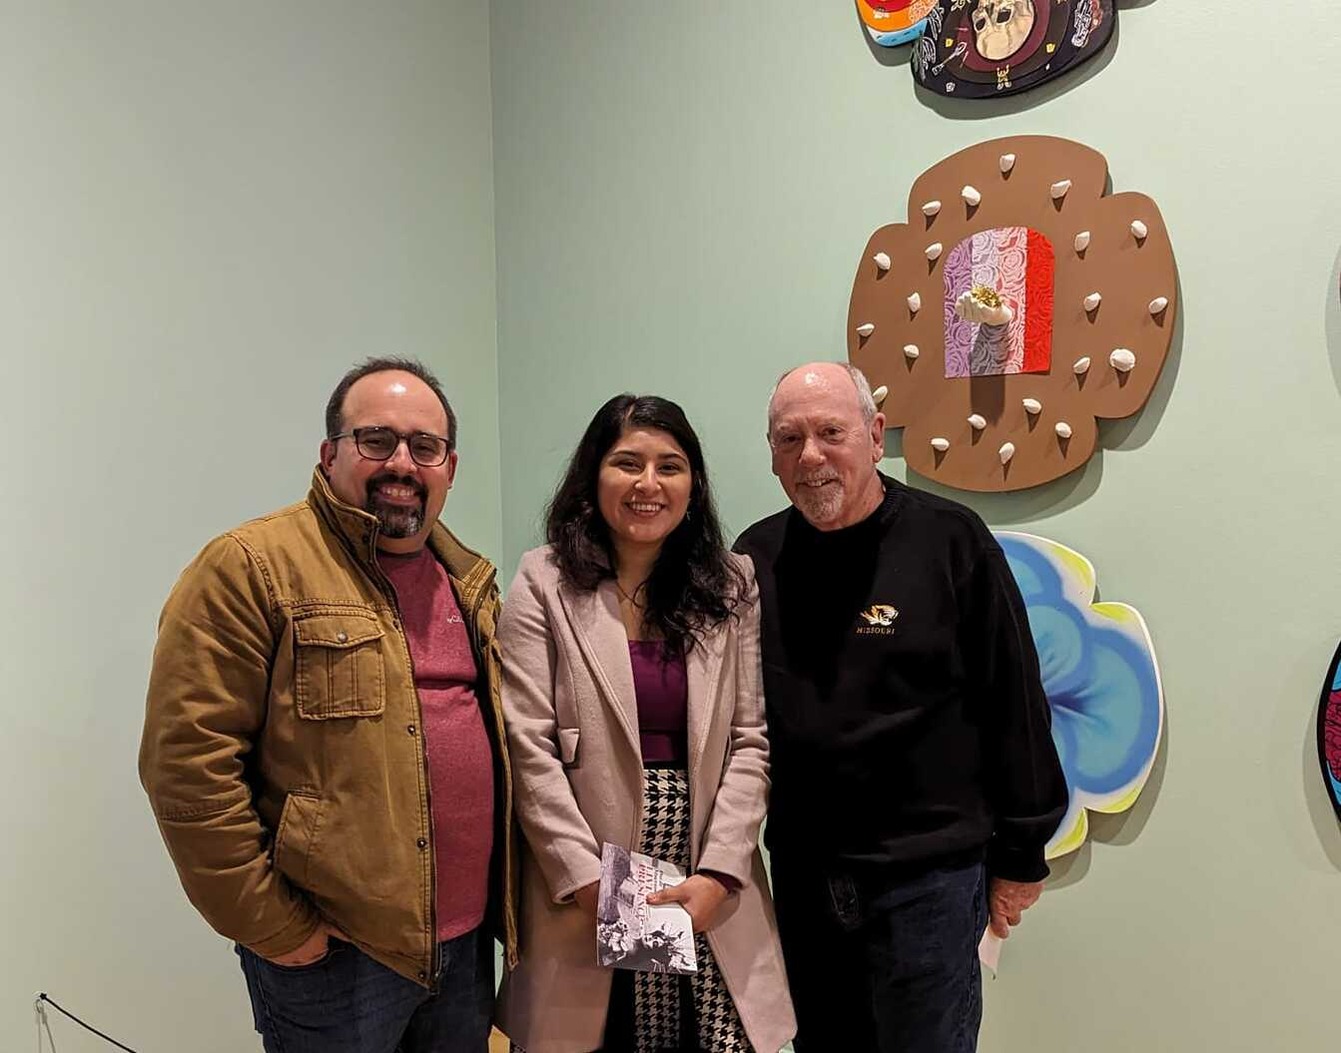 Matt Ragas, Lupe Casas, and Don Ingle at the National Museum of Mexican Art